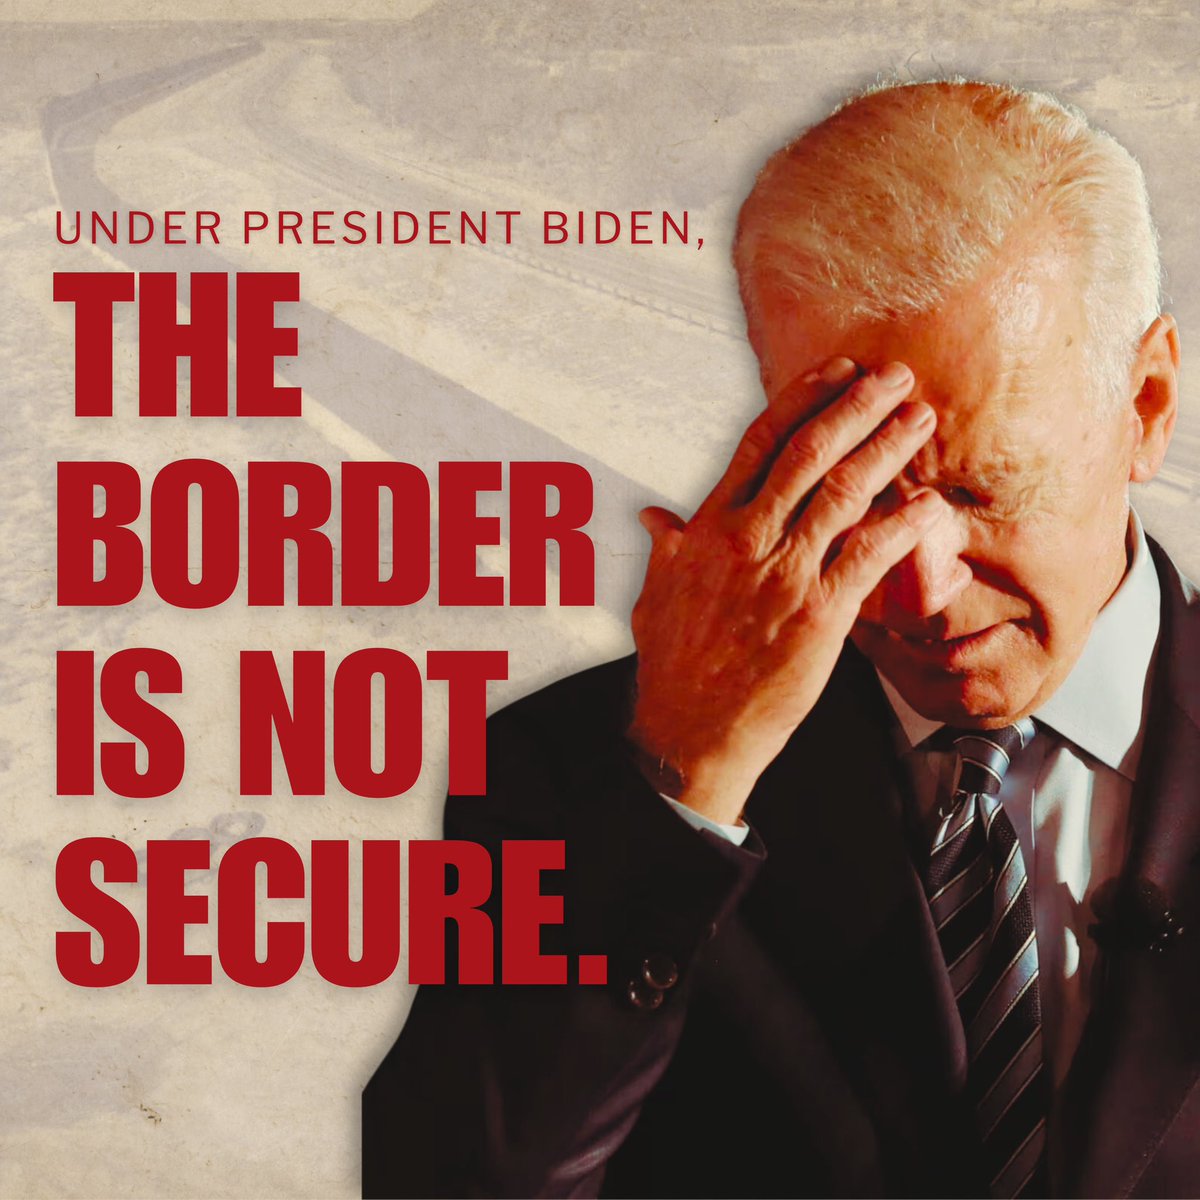 Since President Biden took office, over 9 MILLION illegal immigrants have crossed the border into our country.

Texas is fighting back.

Thanks to Operation Lone Star, we continue to reinforce our efforts to hold the line at the southern border.